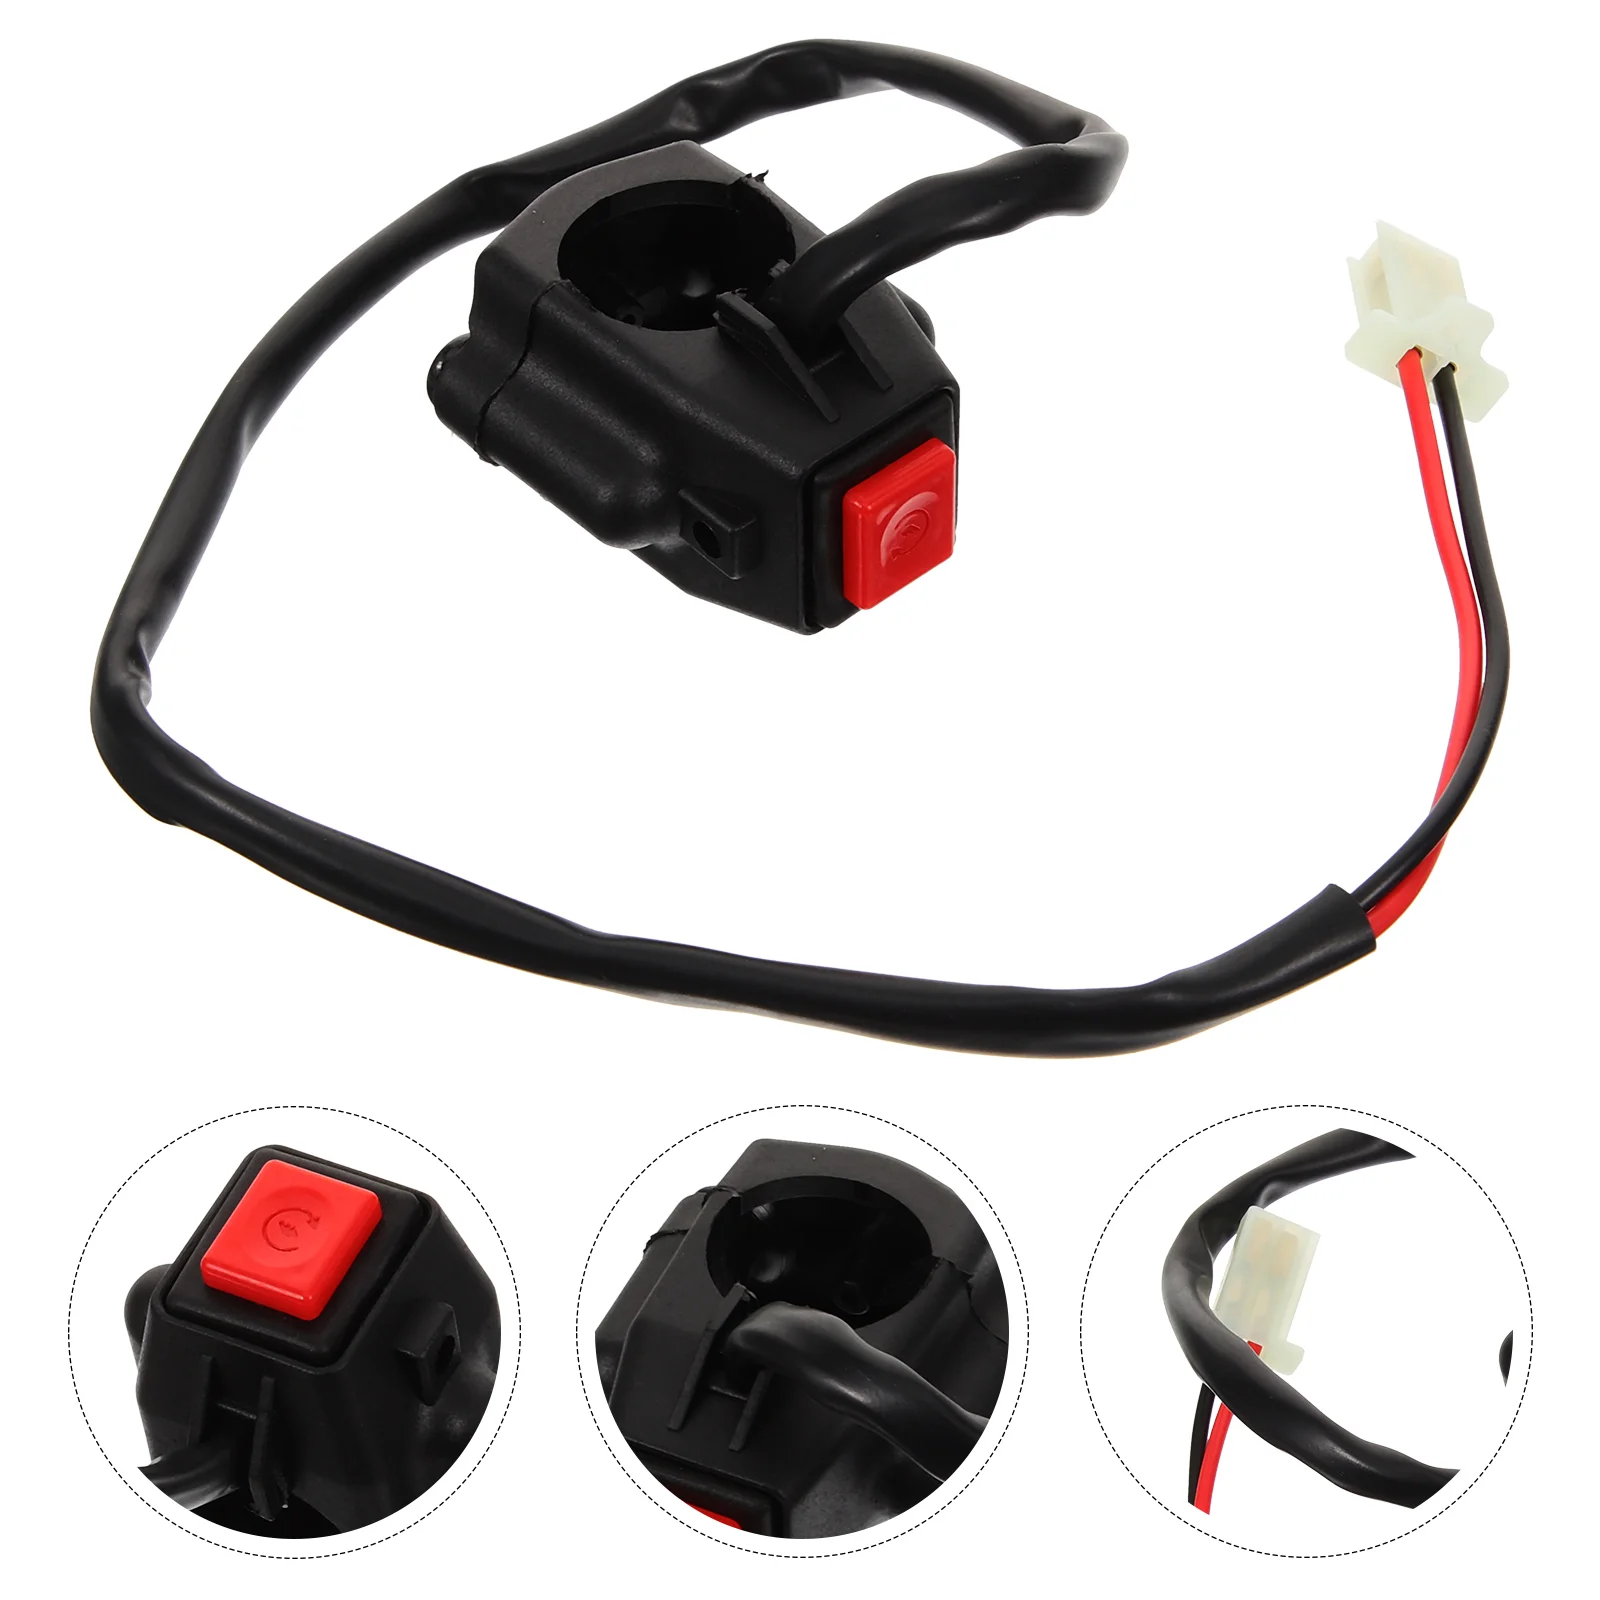 Start Switch Automotive Remote Car Starter Kit for Truck Automatic System Push Ignition Aluminum Alloy